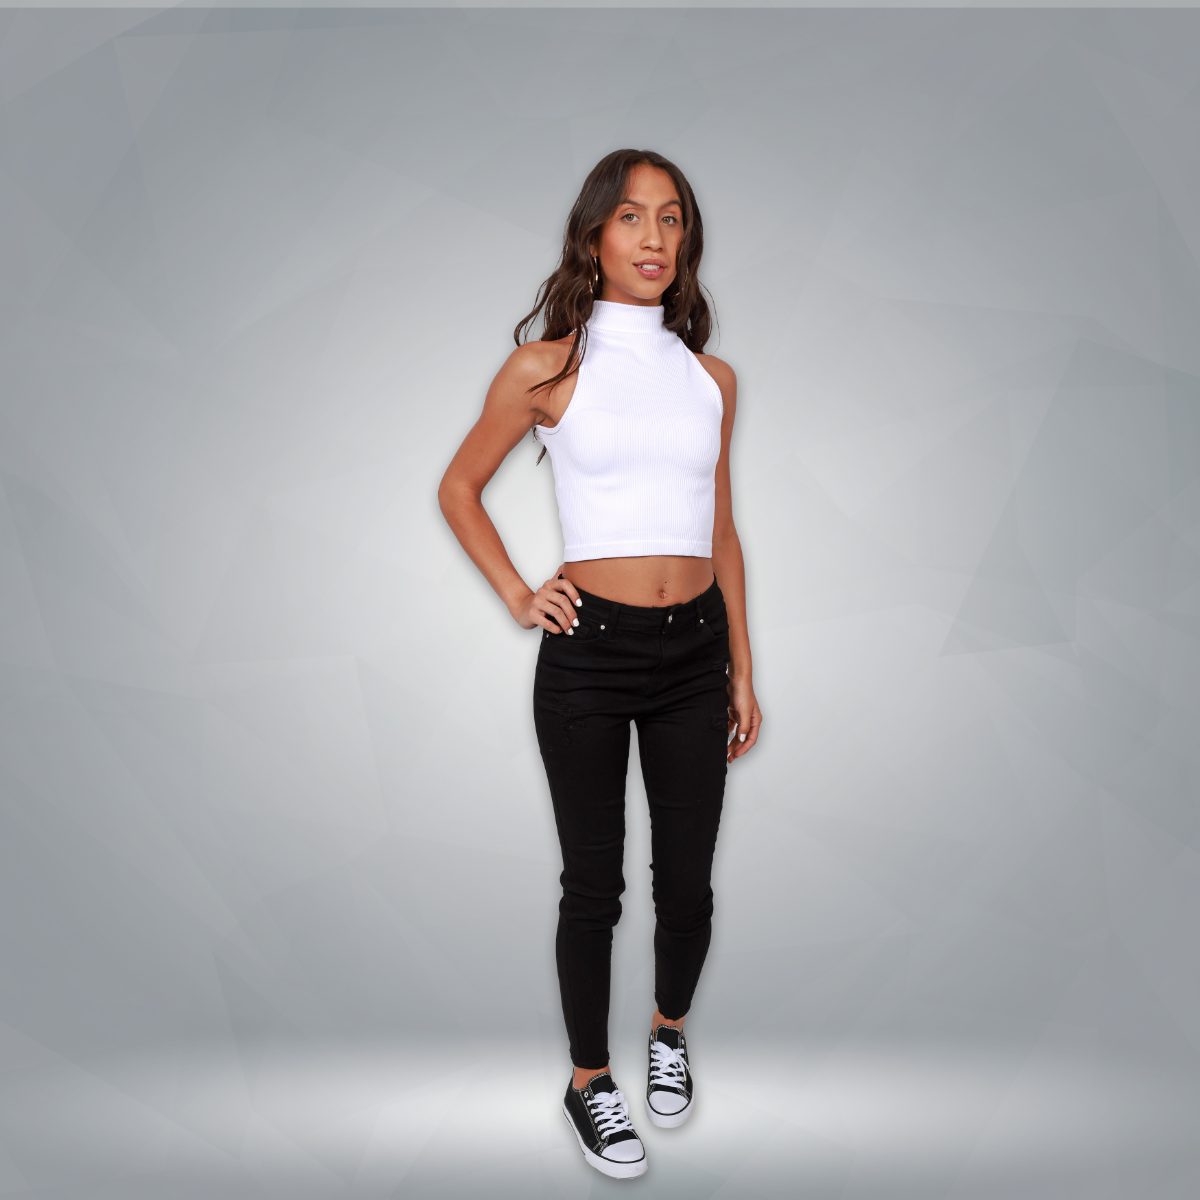 Pictured above is a My Melrose look by Jacqueline Castillo featuring our white "Cotton" Sleeveless Mock Top, "Wax" 27" Black Denim Skinny Jeans, and "S-3" Low Top Canvas Sneakers.